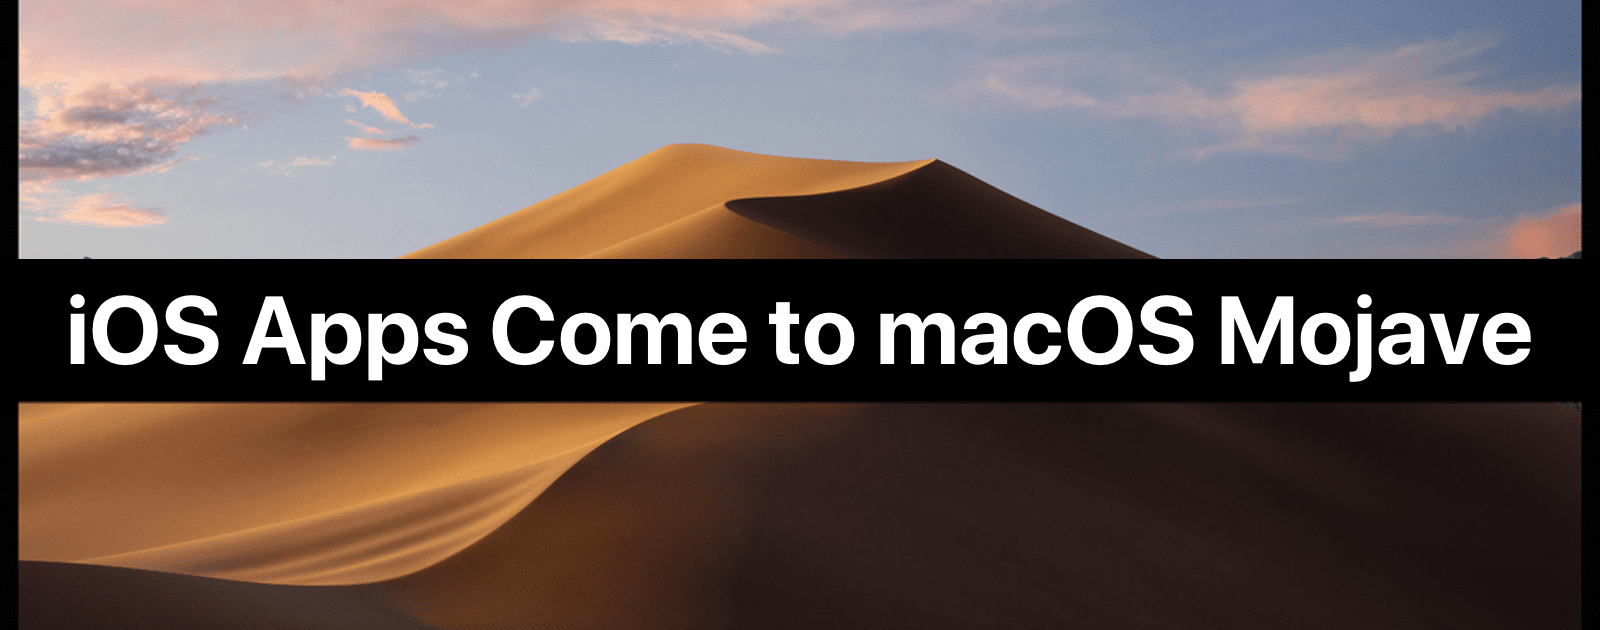 Macos 10.14 Iphone And Ipad Apps